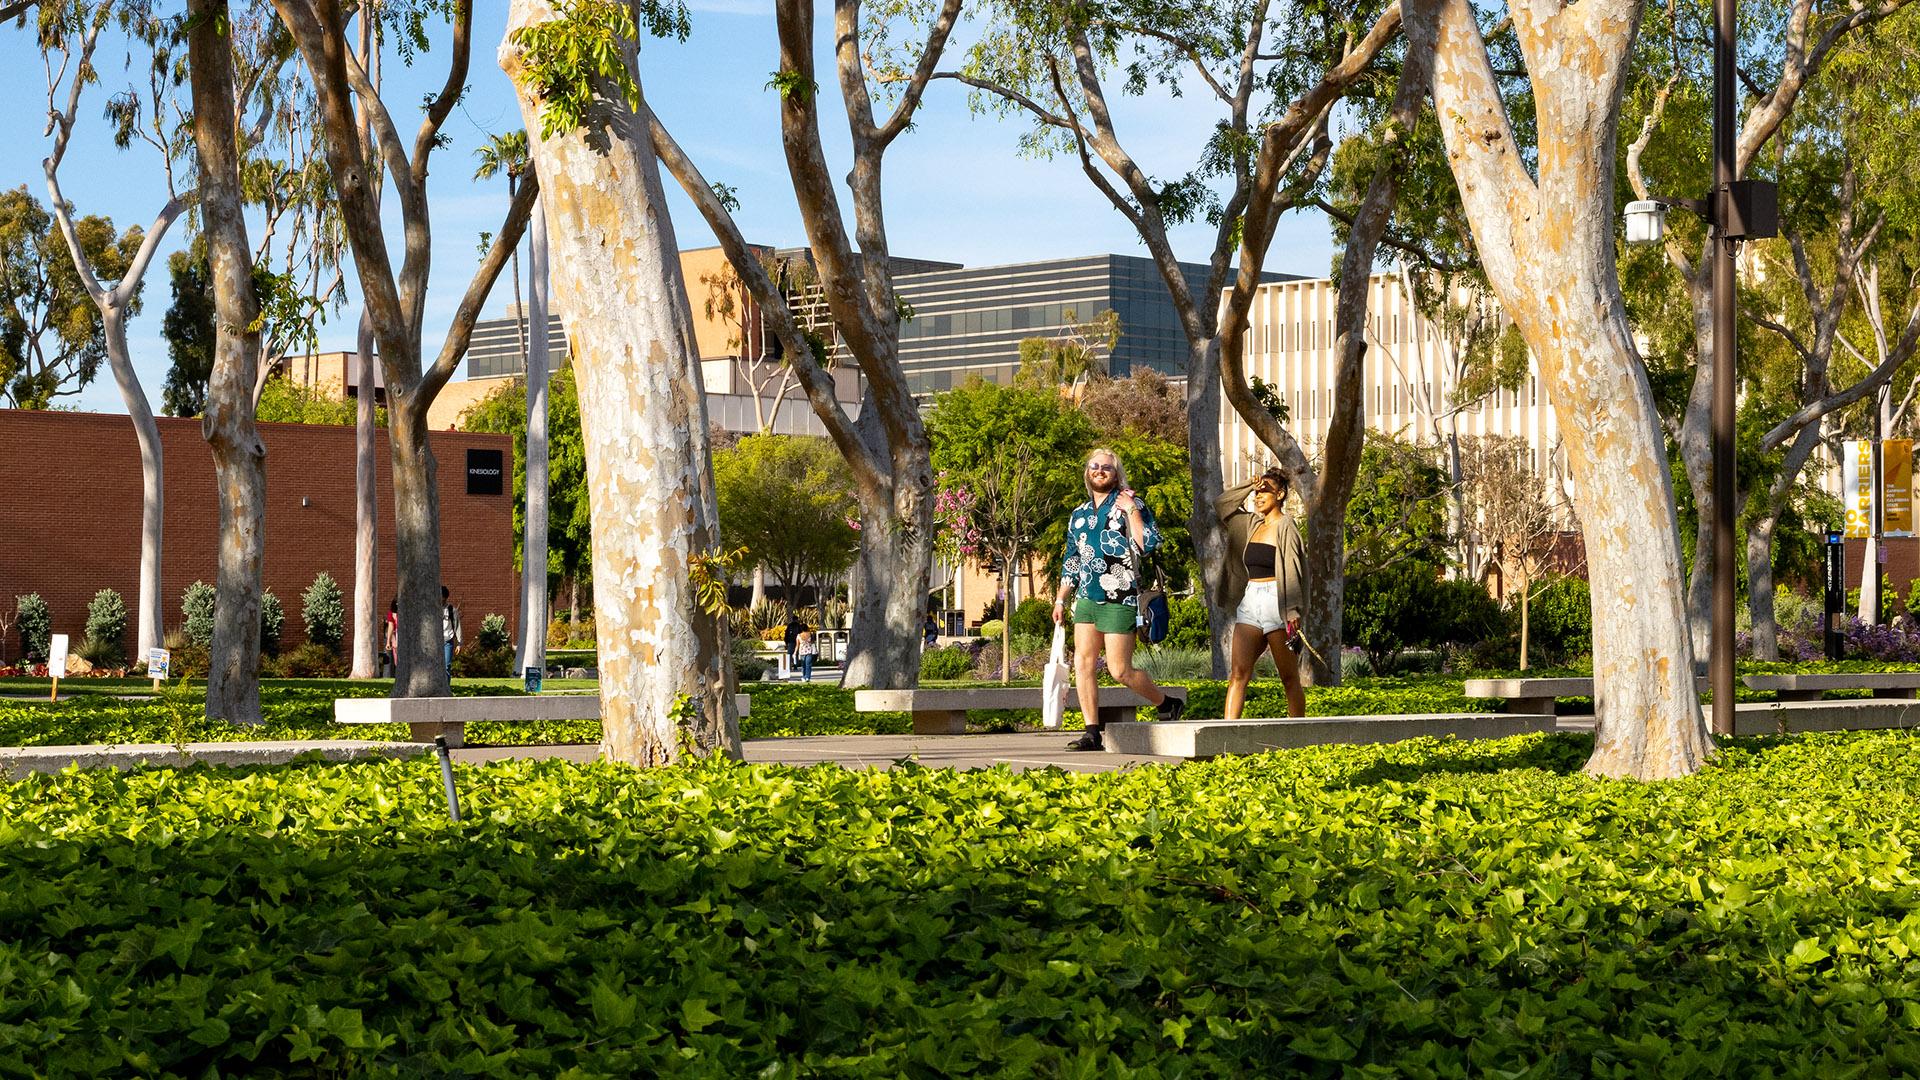 People walking on campus on a sunny day, with several trees in the image